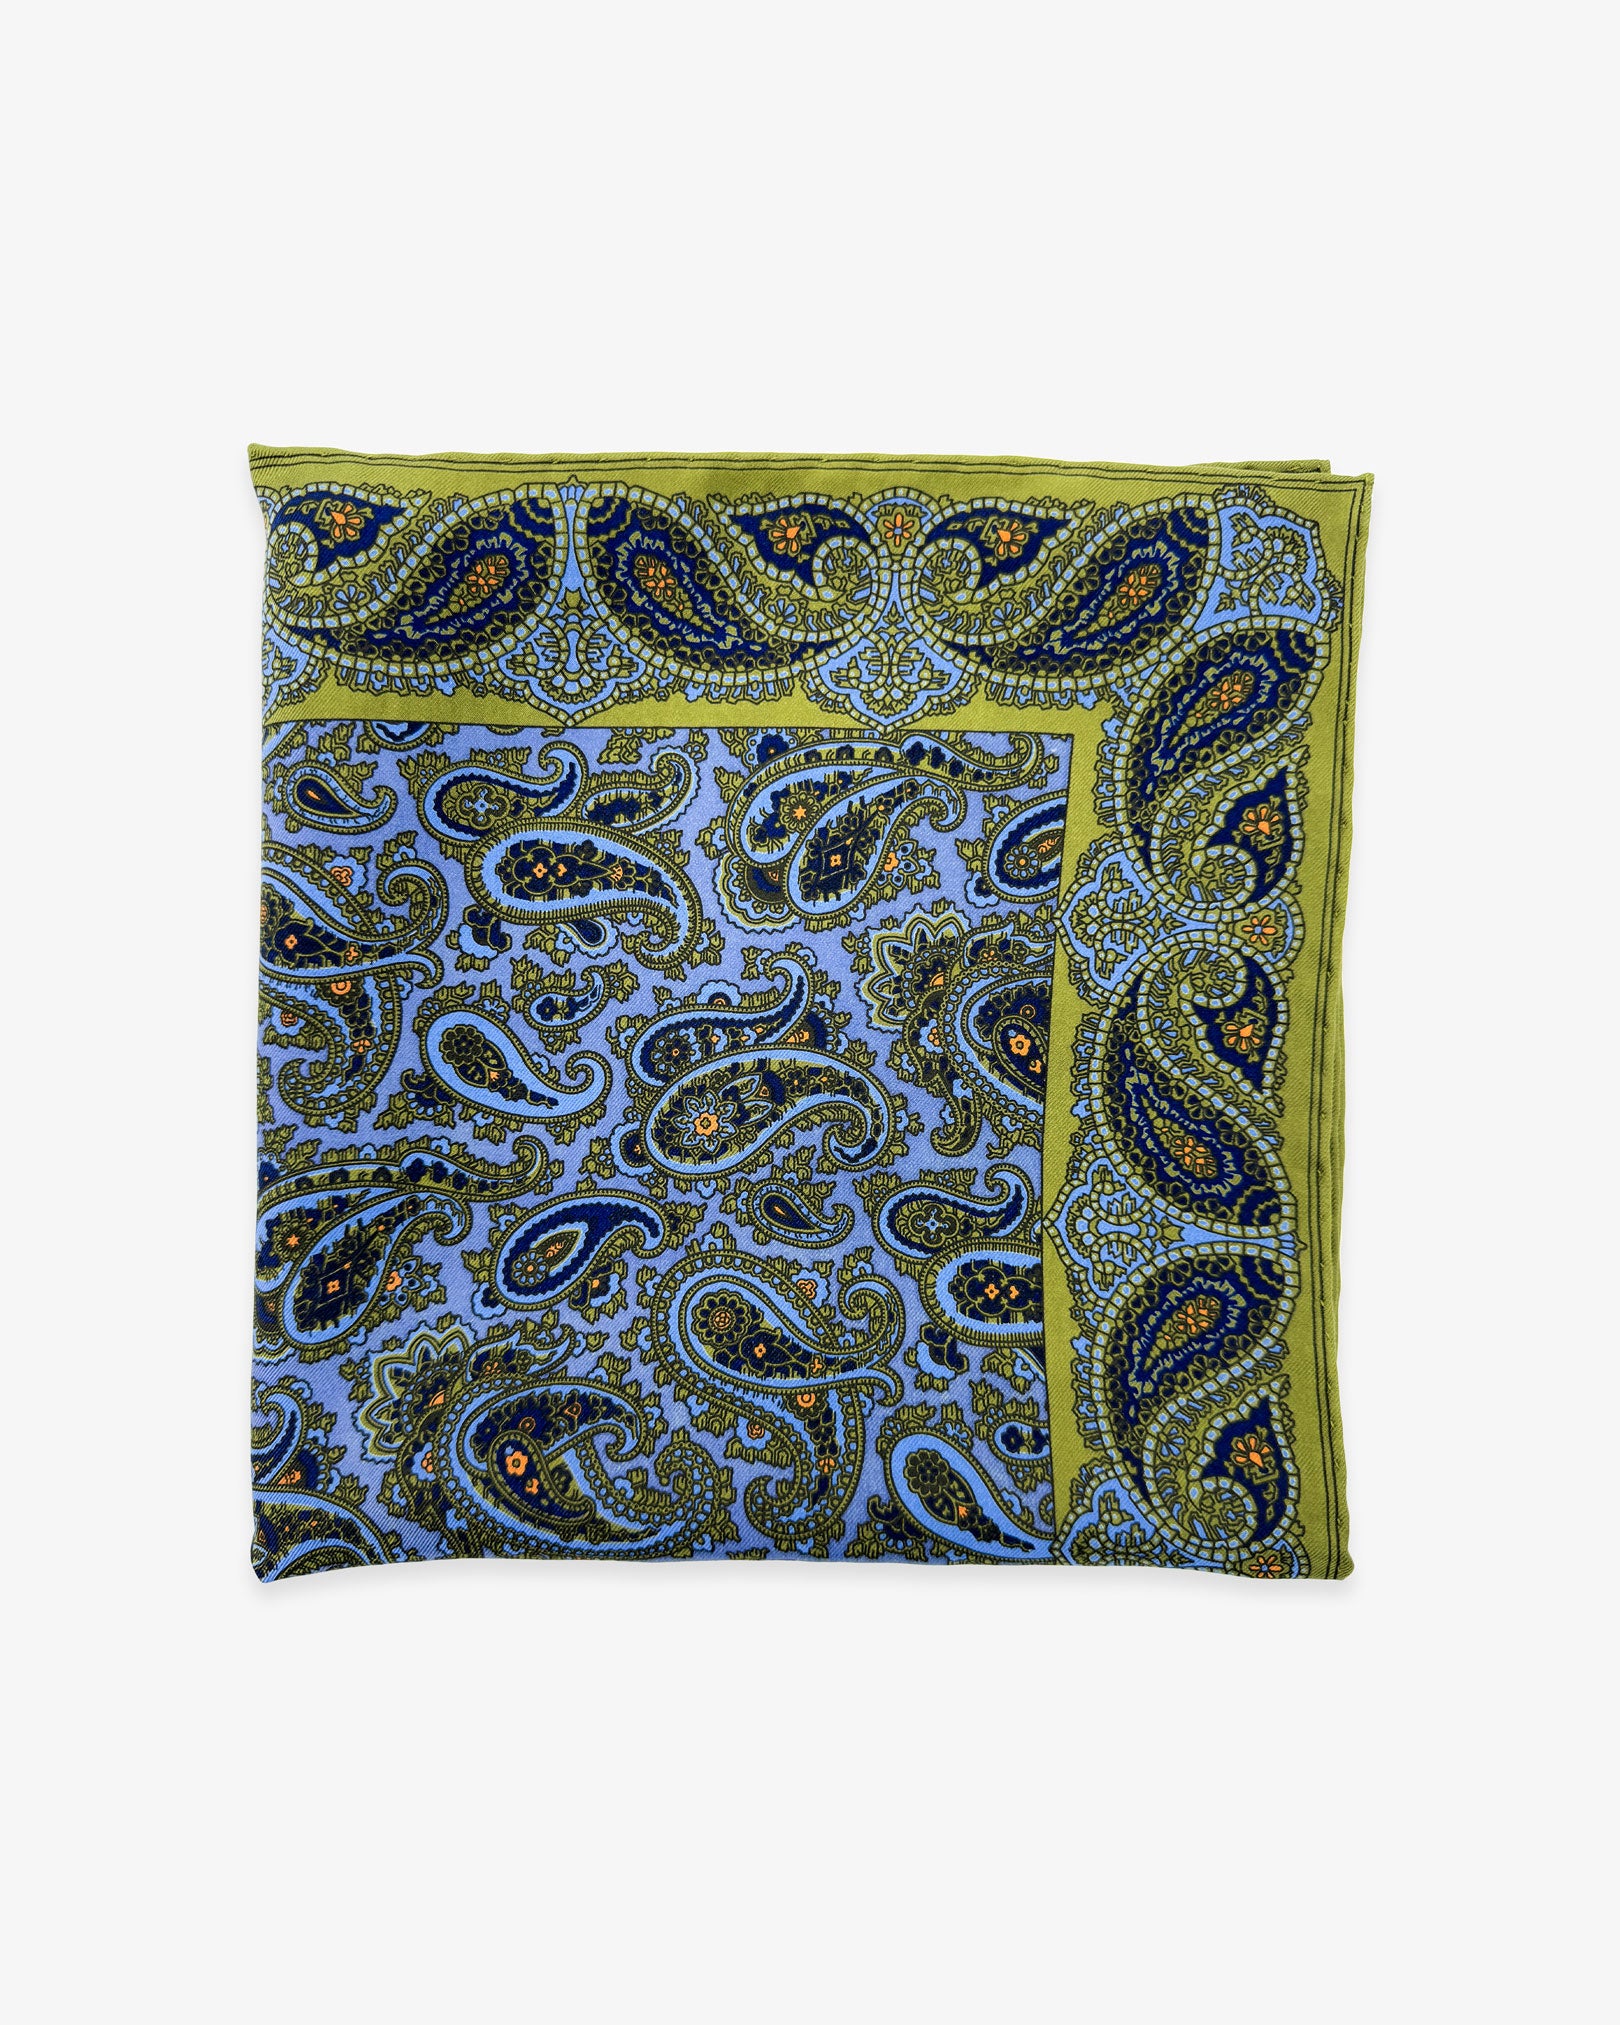 The 'Acton' pocket square from SOHO Scarves Madder silk collection. Folded into a quarter, showing the intricate inner and outer paisley decoration in violet and lime green.